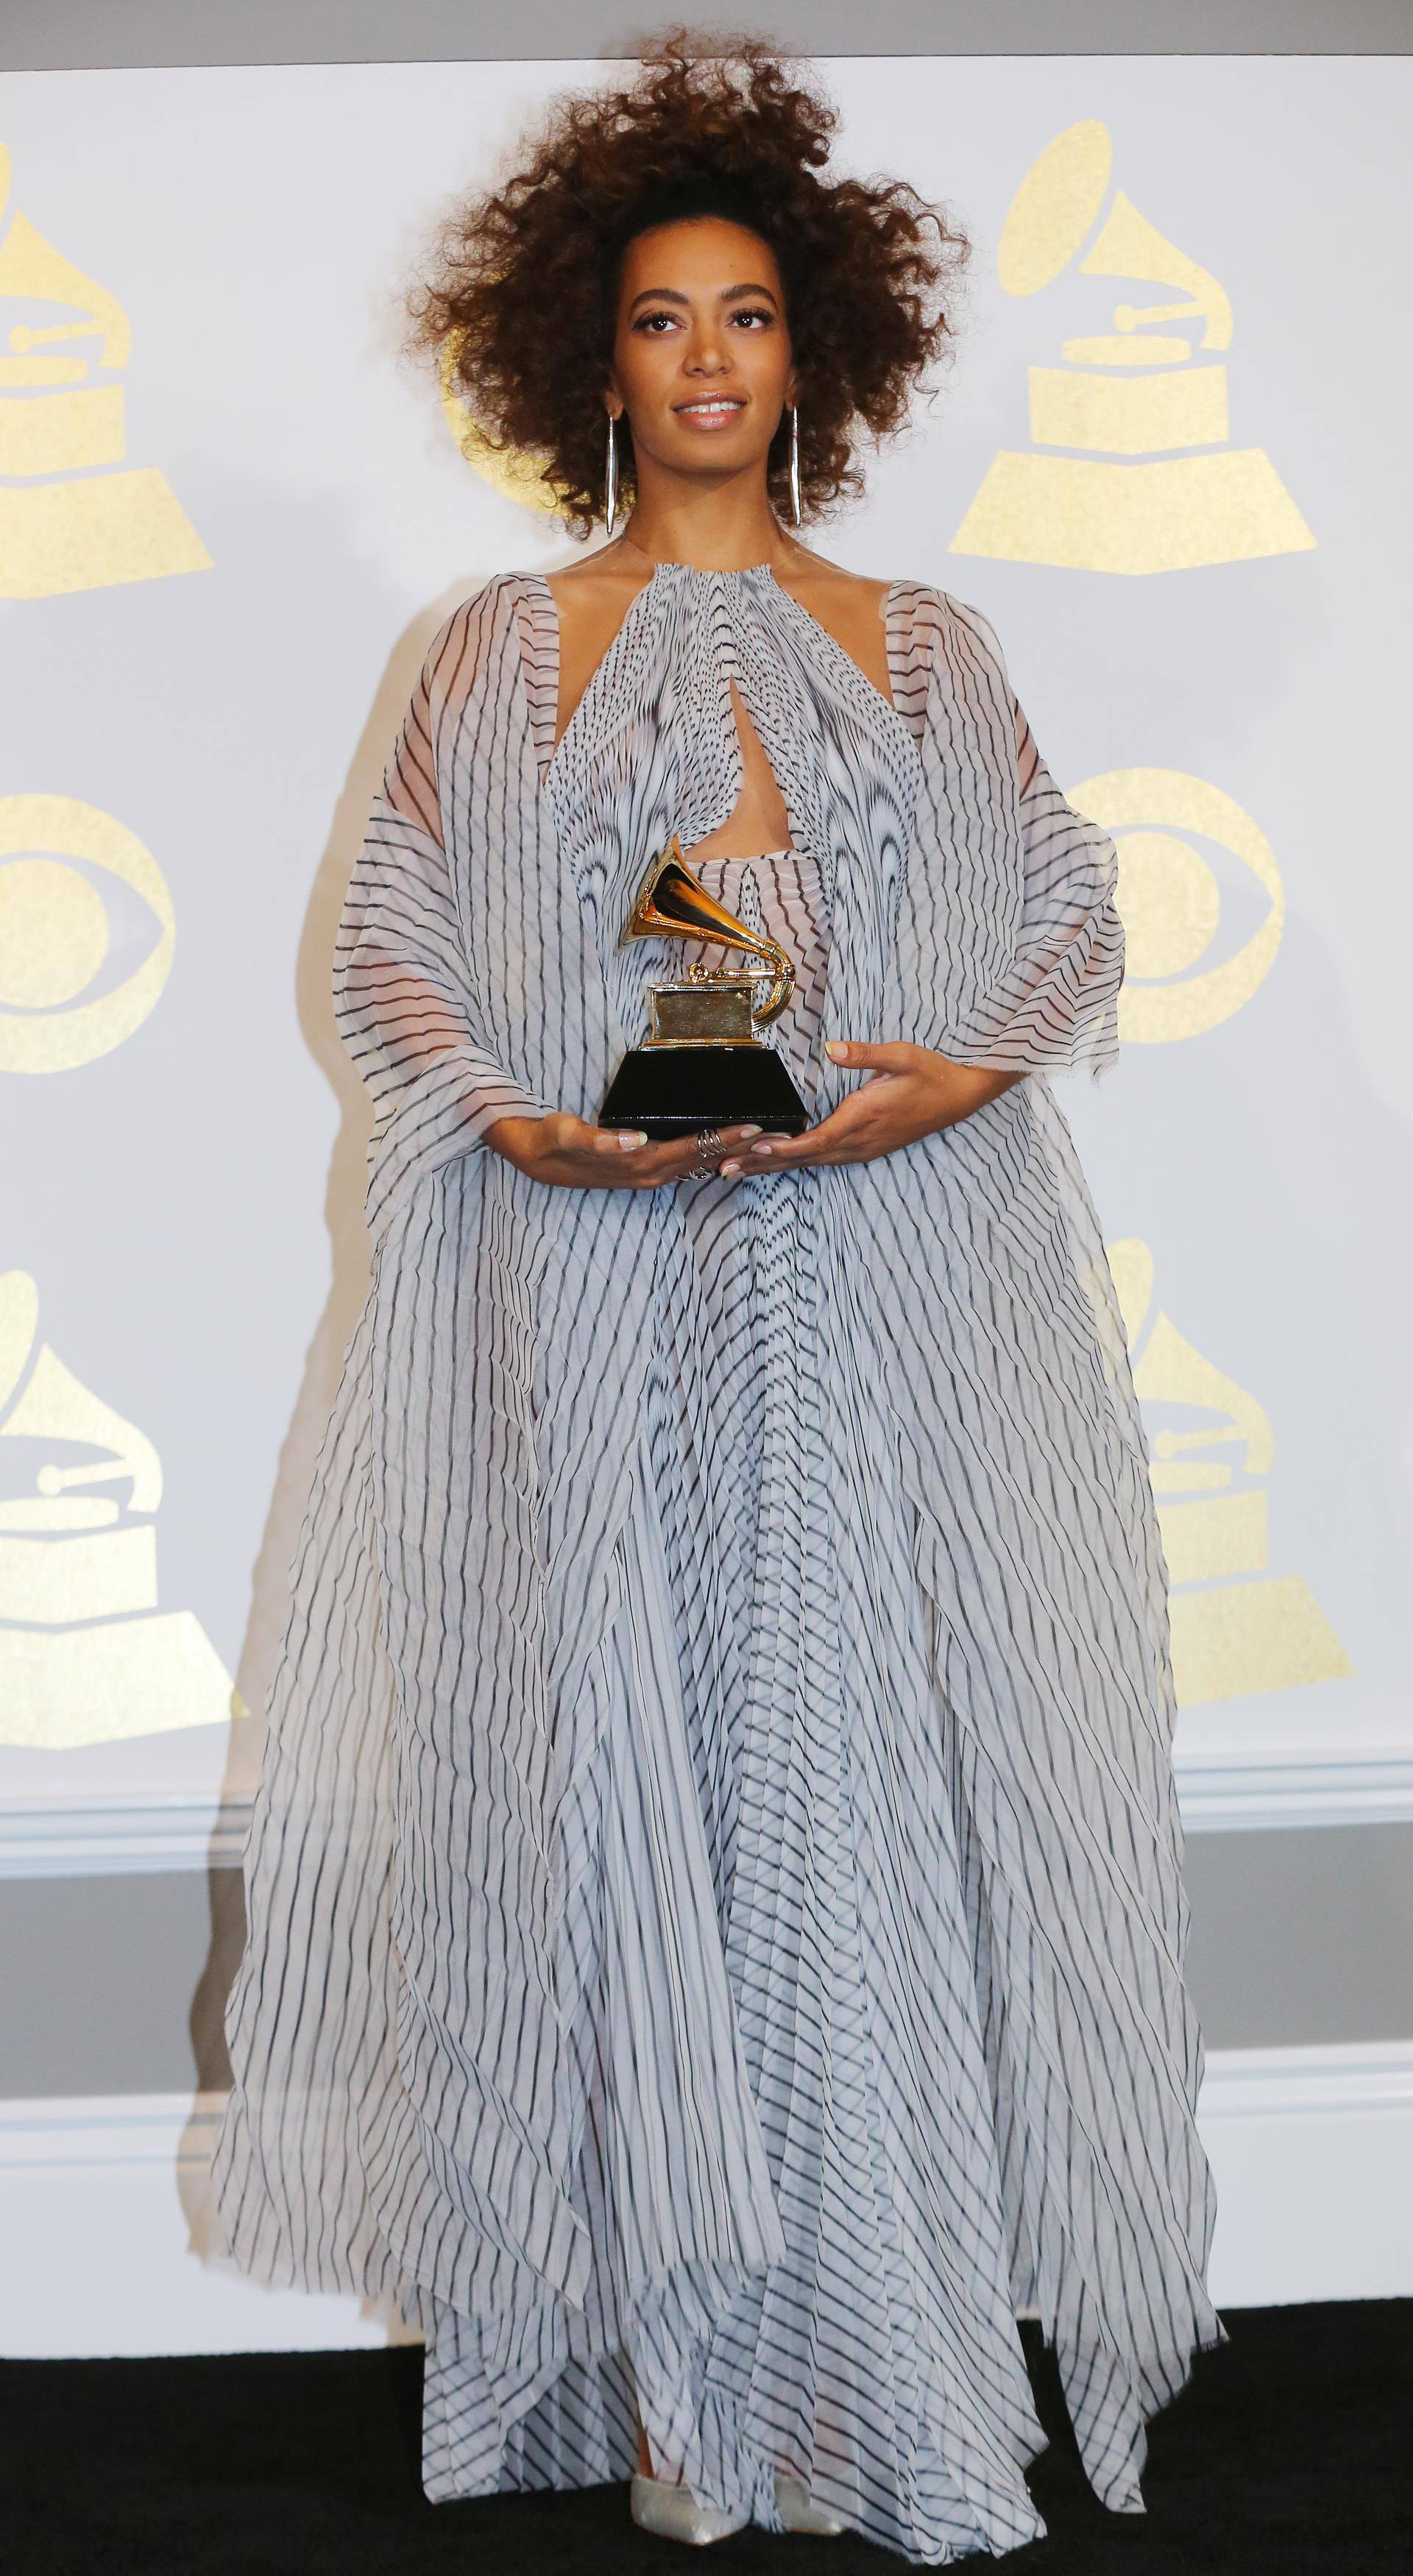 Solange poses with the award she won for Best R&B Performance for "Cranes in the Sky" at the 59th Annual Grammy Awards in Los Angeles